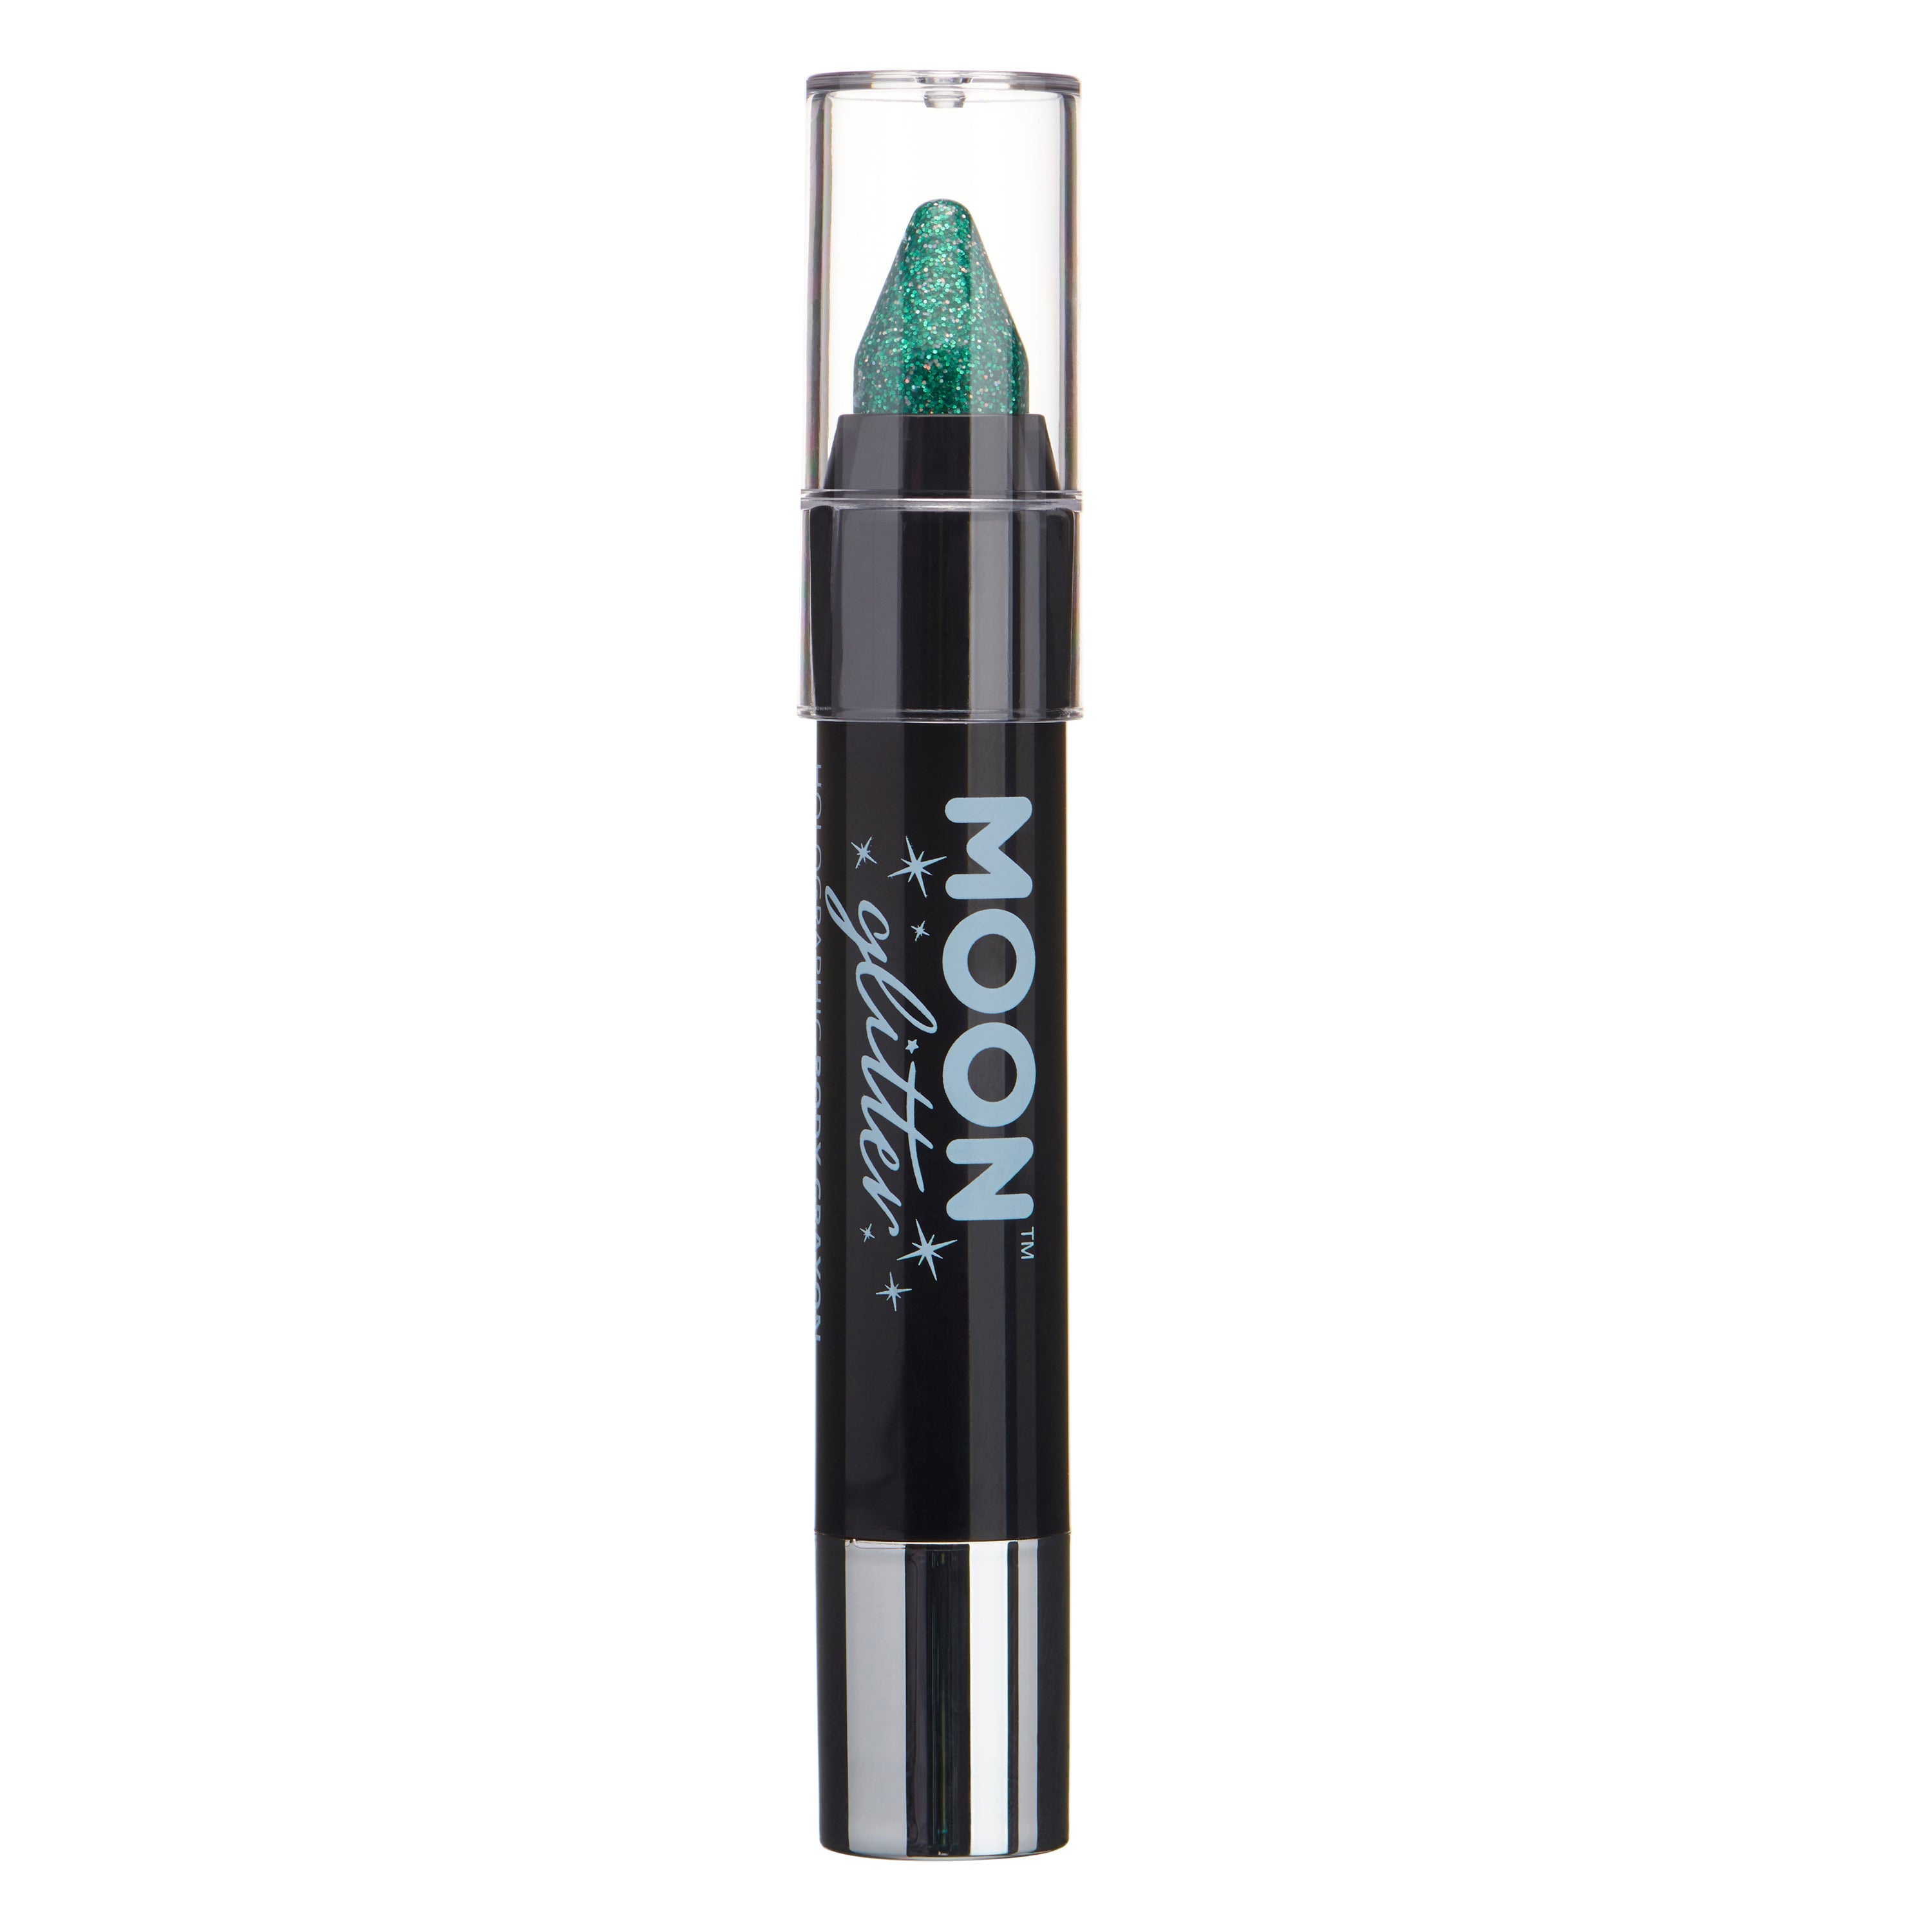 Green - Holographic Glitter Face & Body Crayon, 3.5g. Cosmetically certified, FDA & Health Canada compliant and cruelty free.